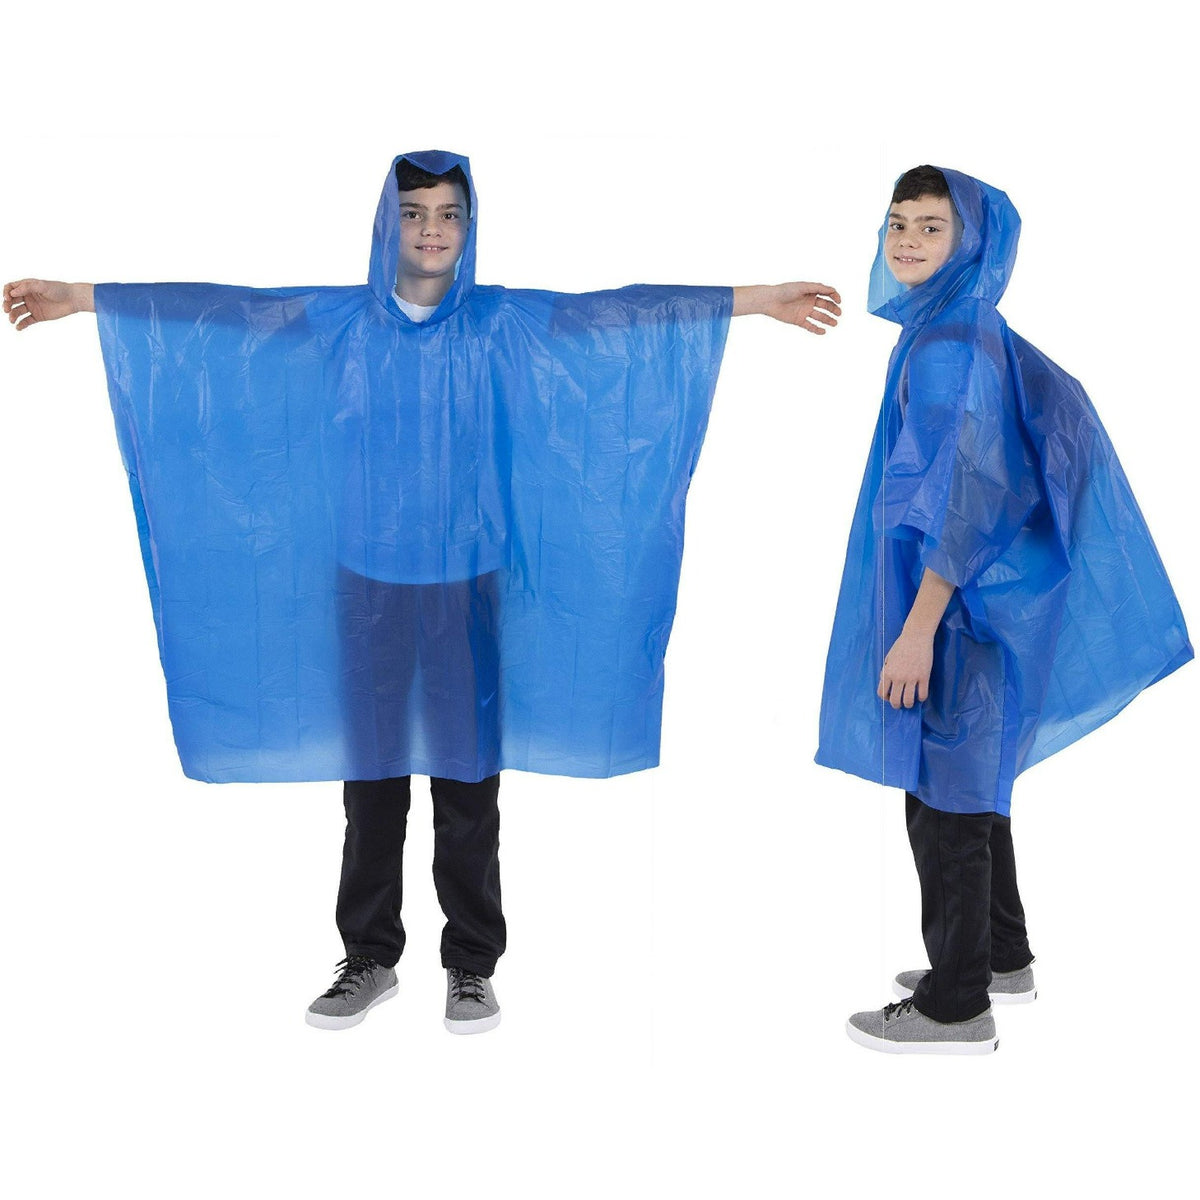 MarsGlider Reusable Rain Ponchos for Kids Children Boy Girl with Hood and Carrying Bag 